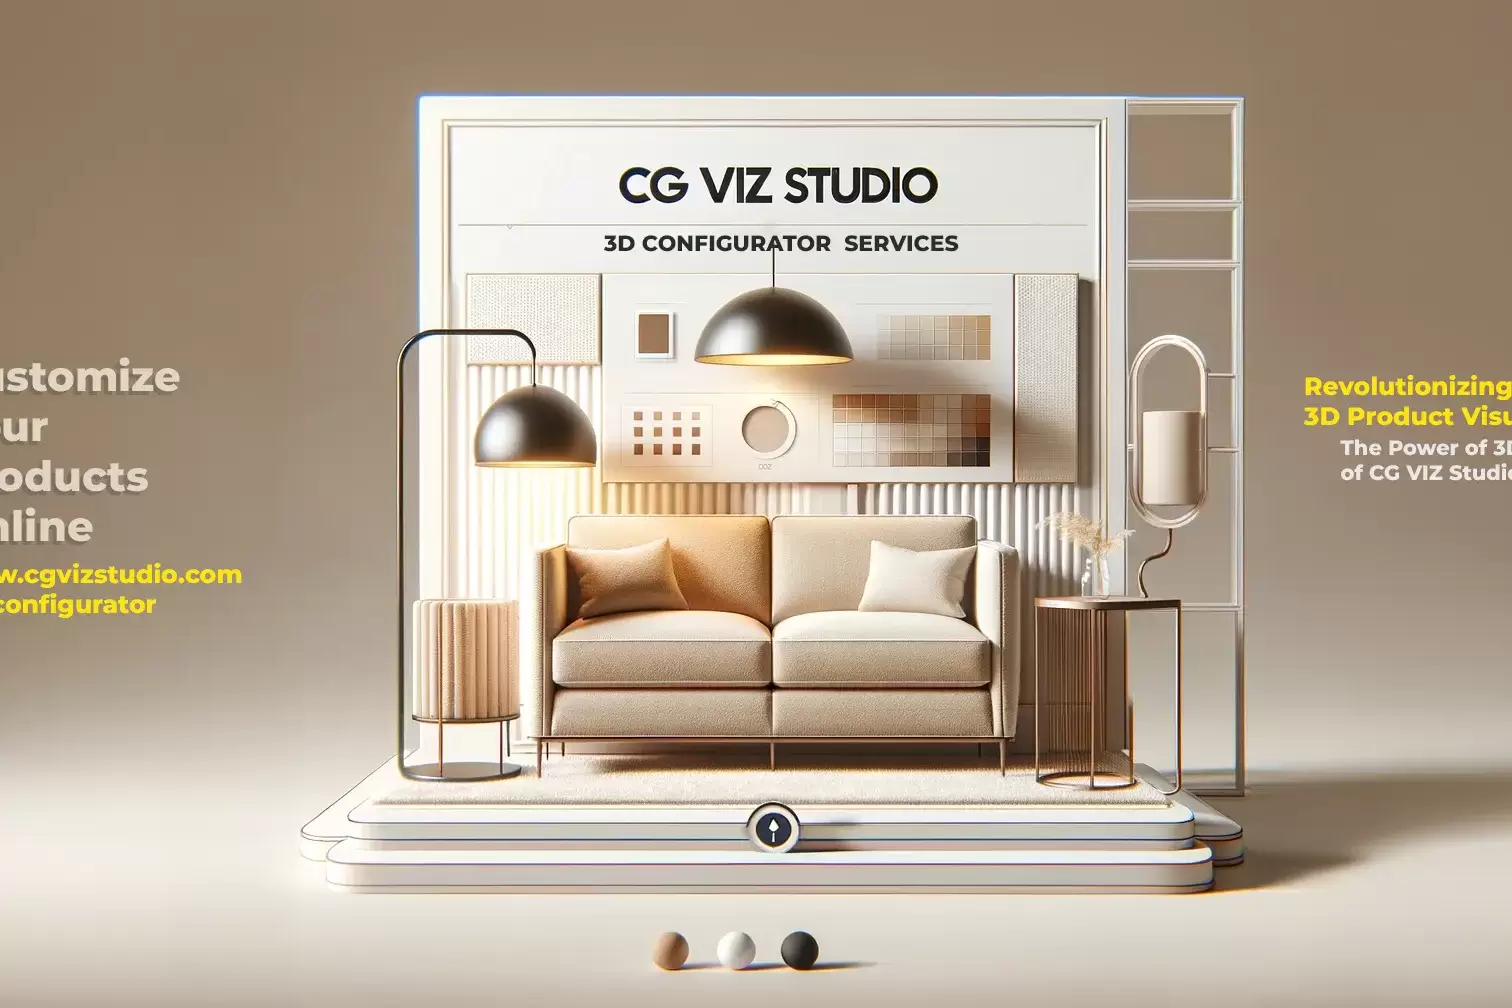 Interactive 3D Configurator interface for home products by CG Viz Studio